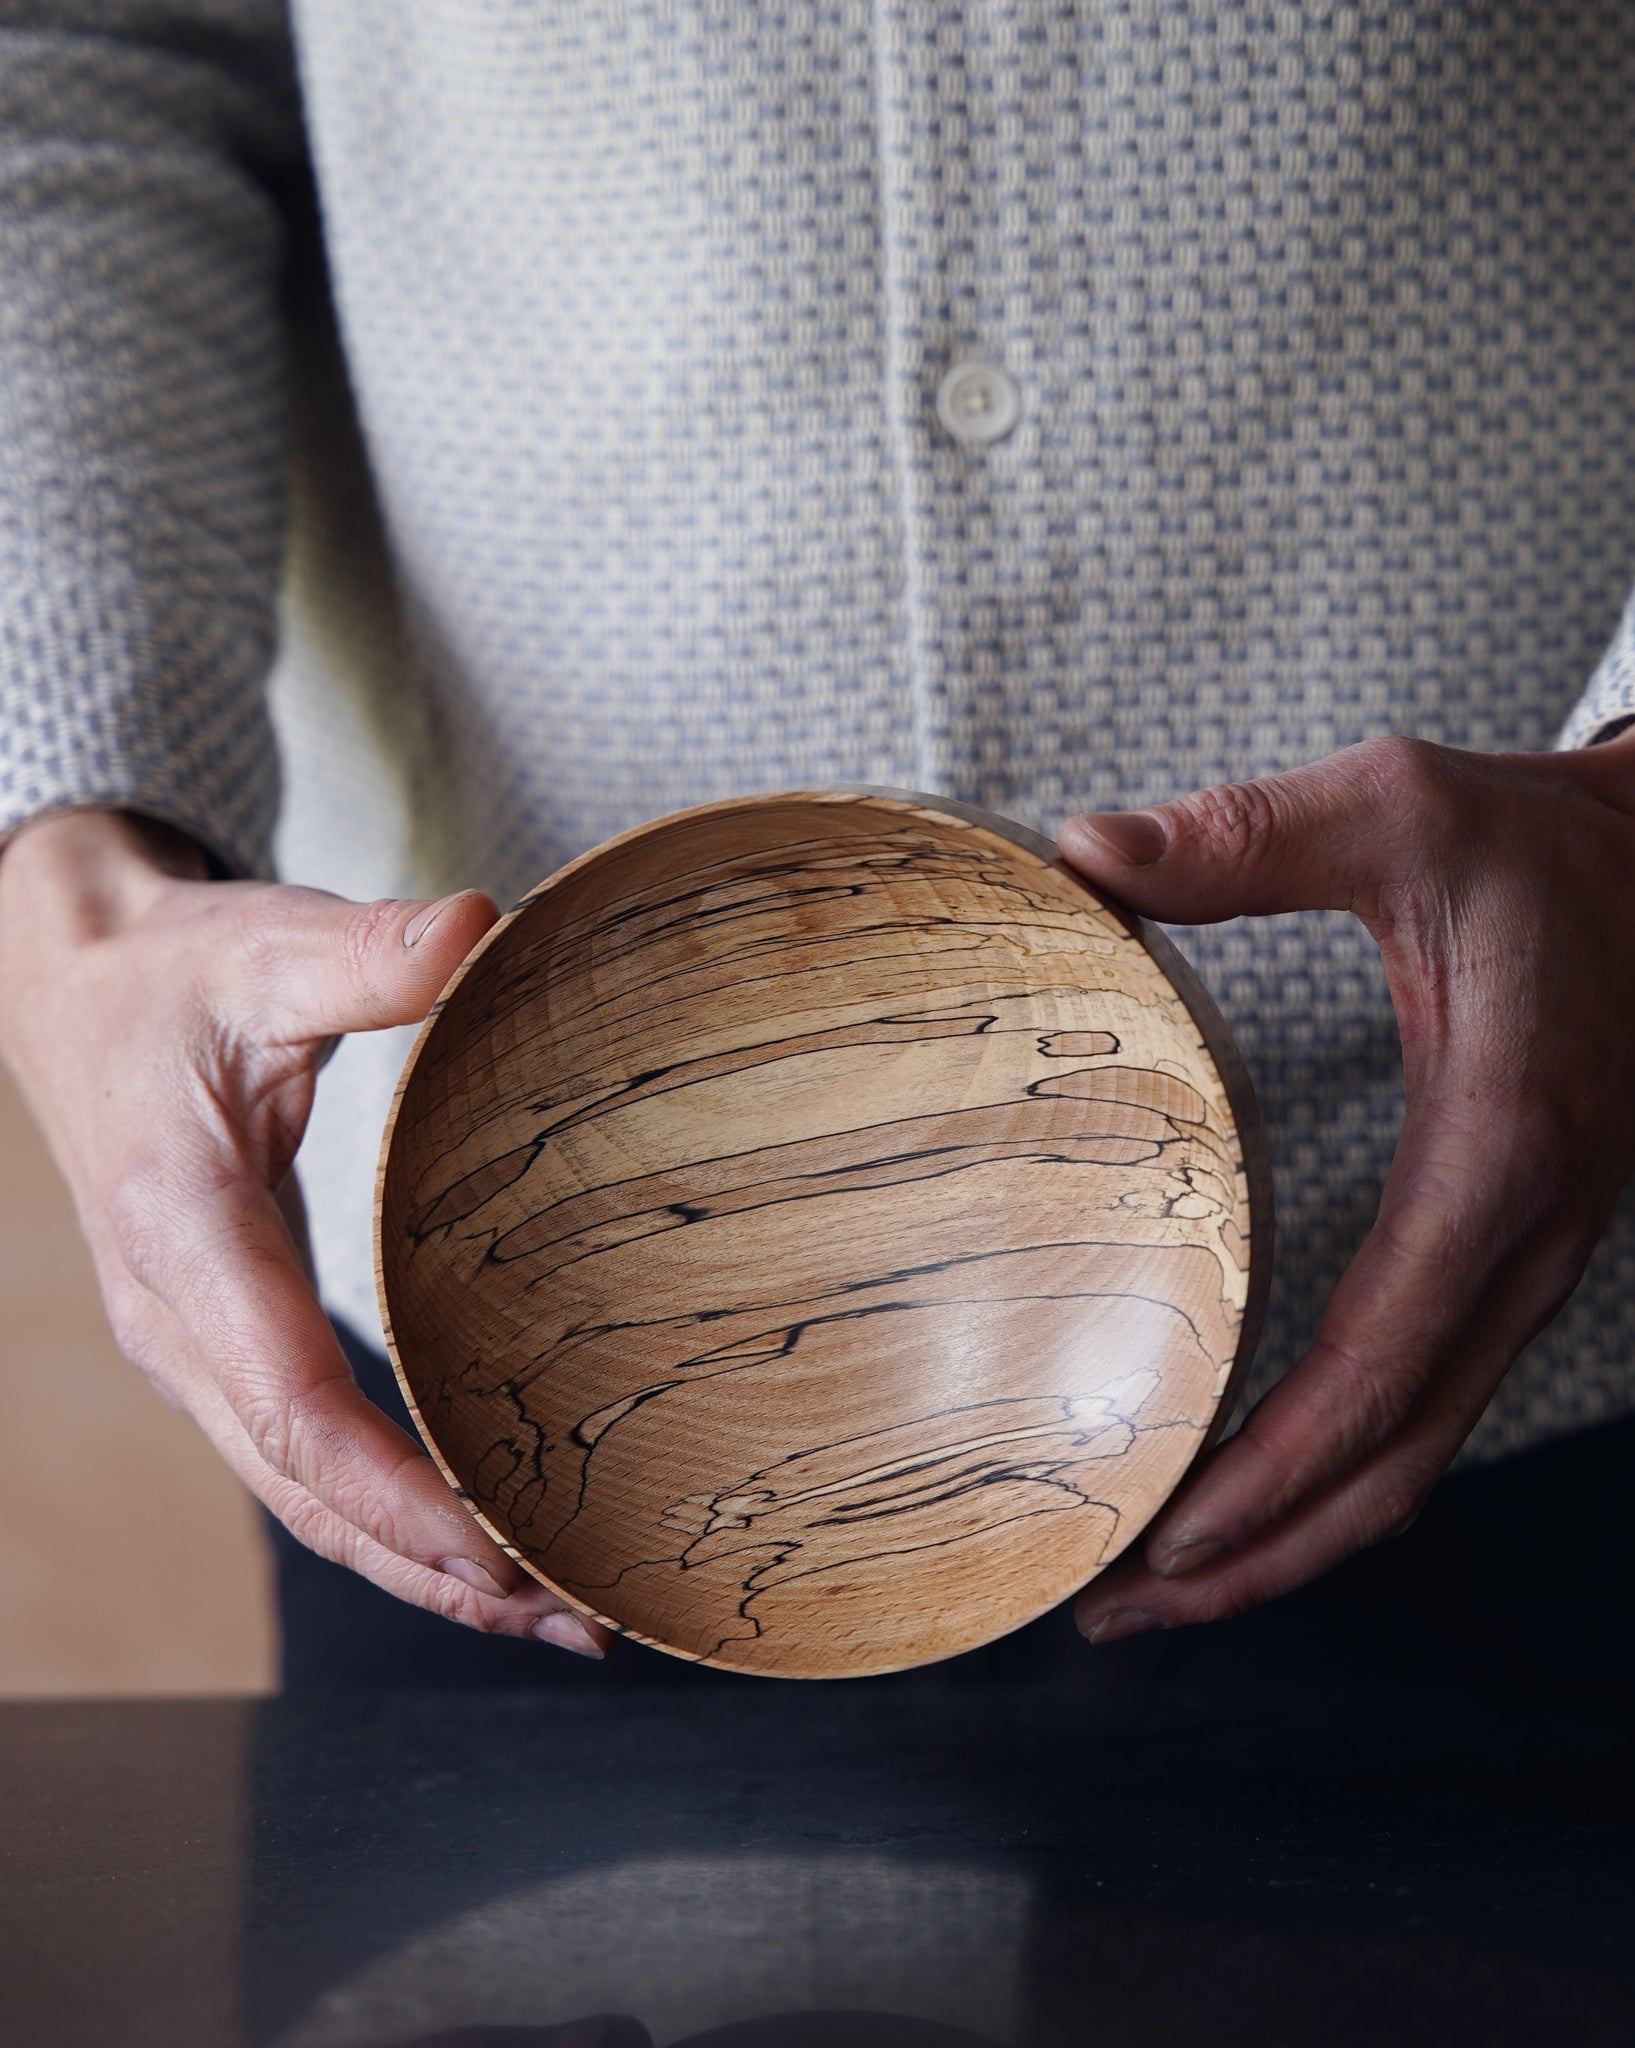 Bowl - in Spalted Beech